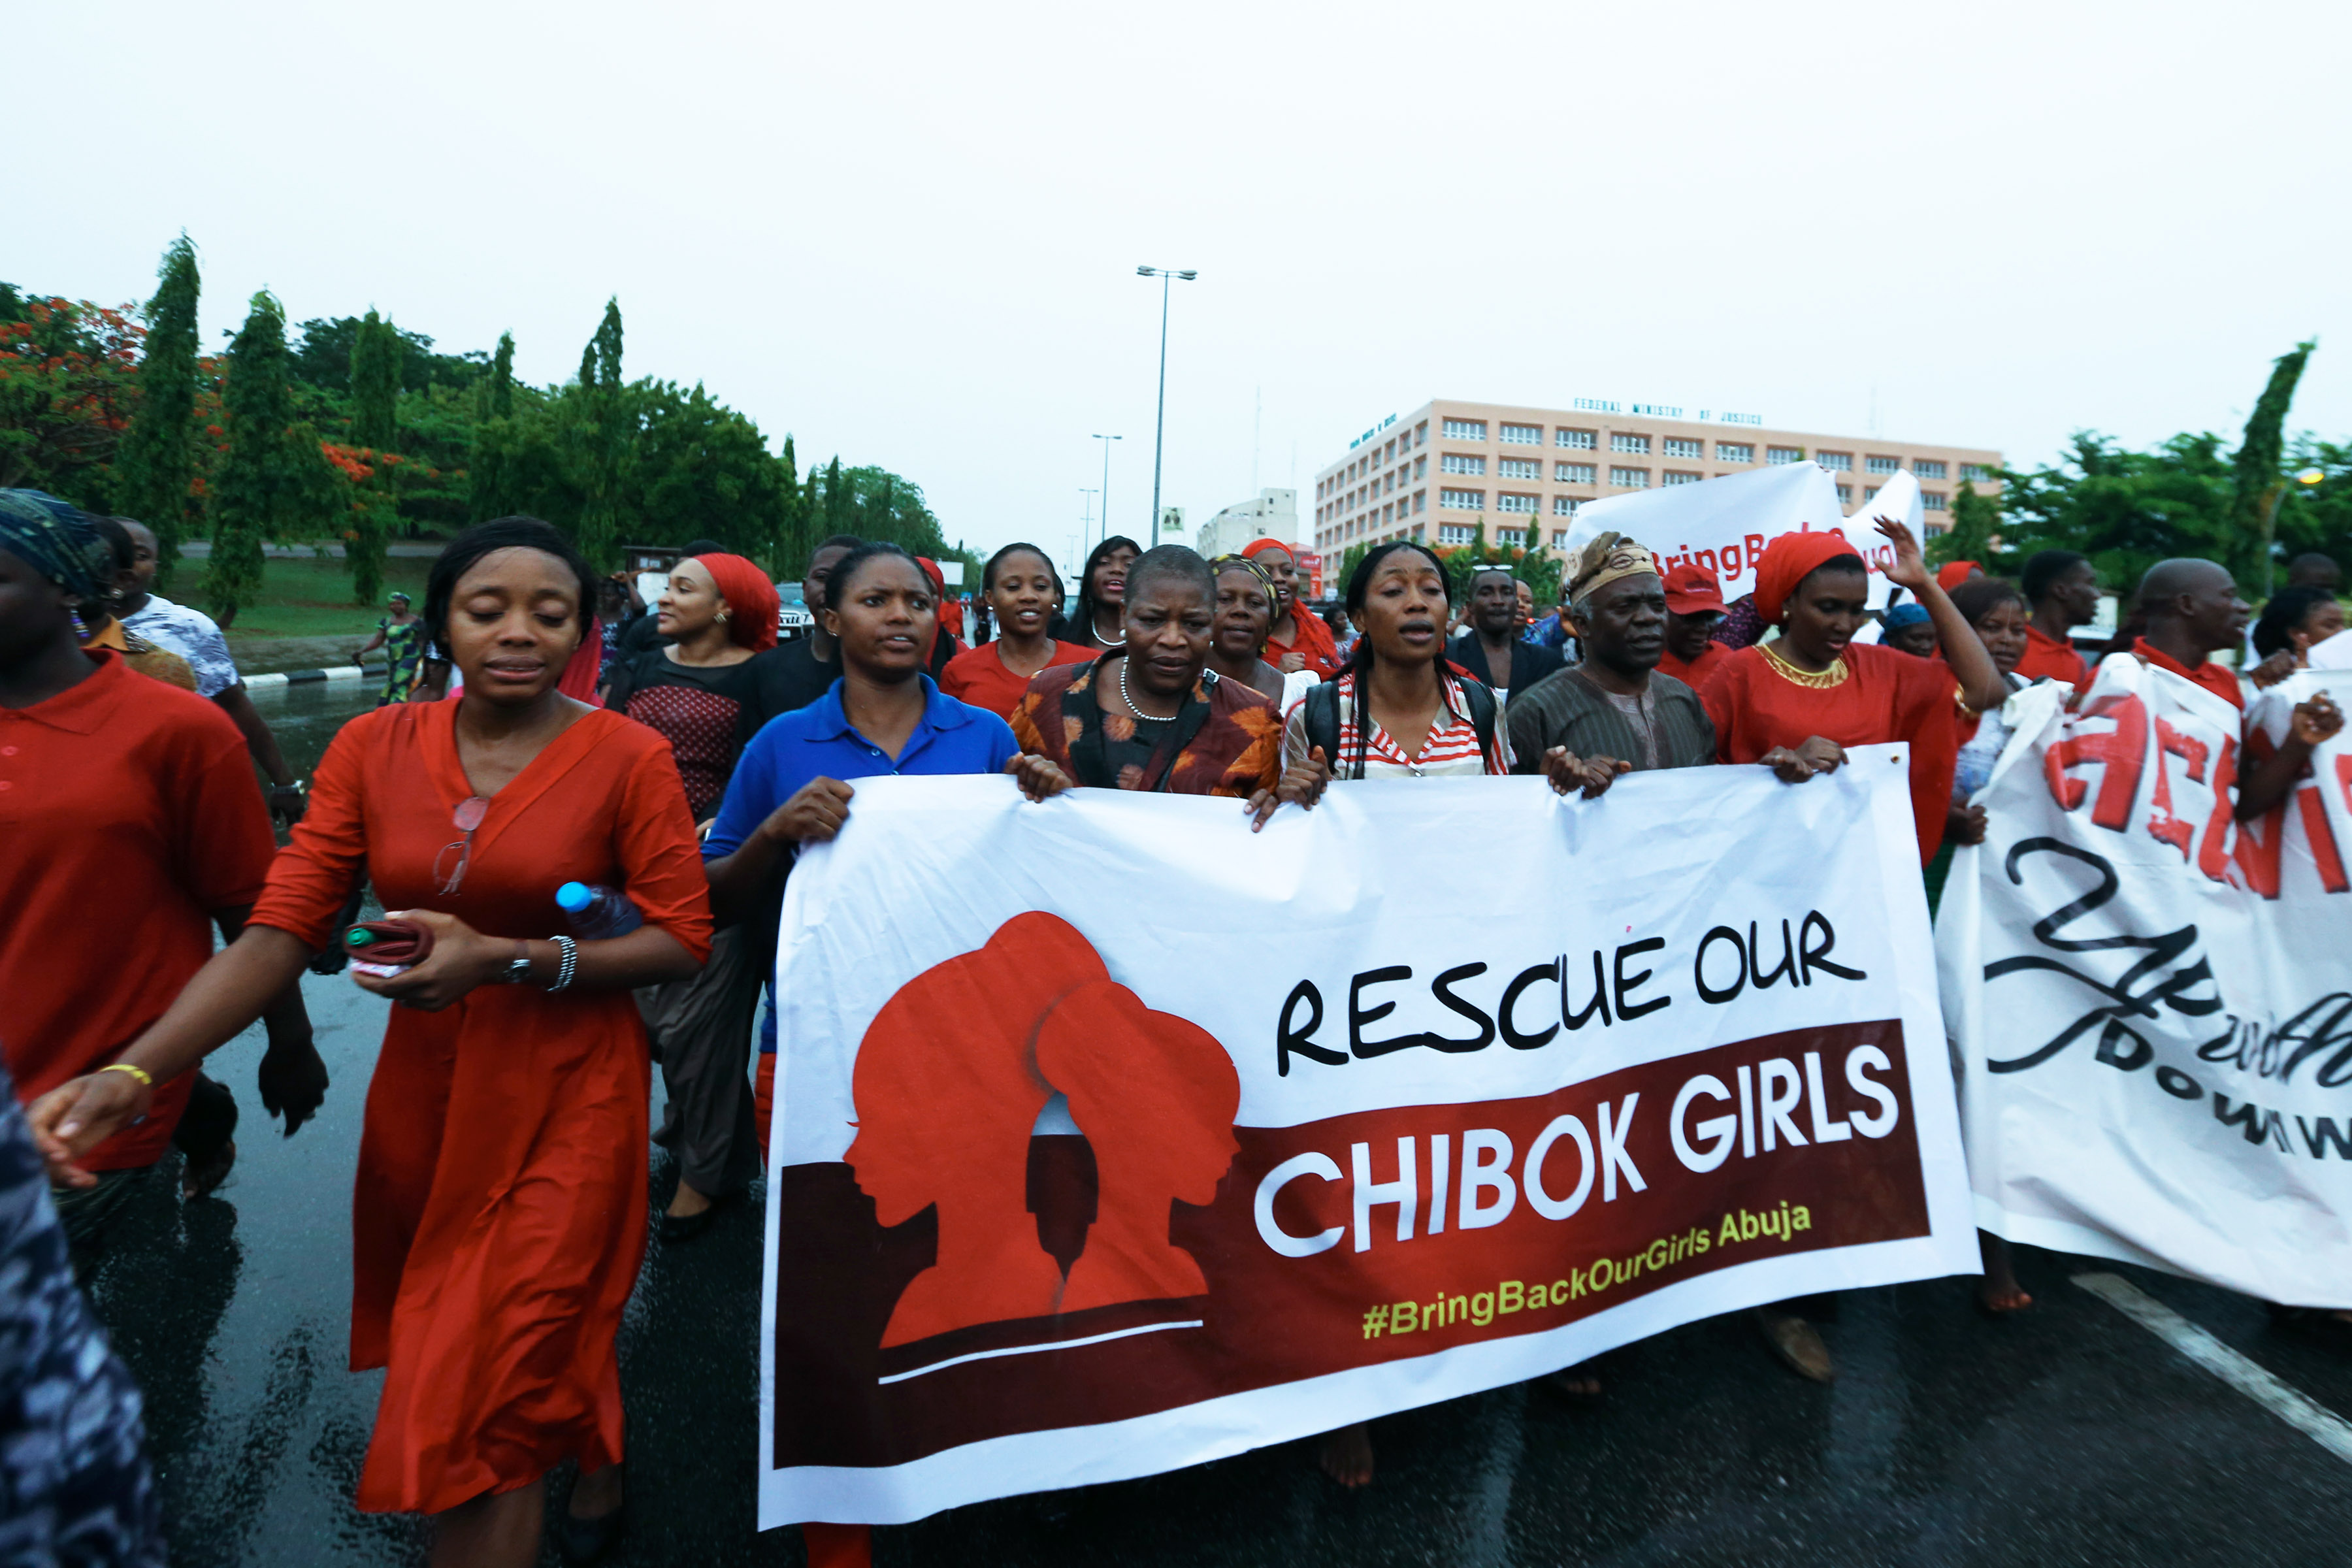 Protesters took to the streets in Abuja to demand urgent action from the government in finding the 200 school girls kidnapped in Chibok. Despite the heavy rain, they marched along. Photo by Ayemoba Godswill. Copyright Demotix (4/30/2014)